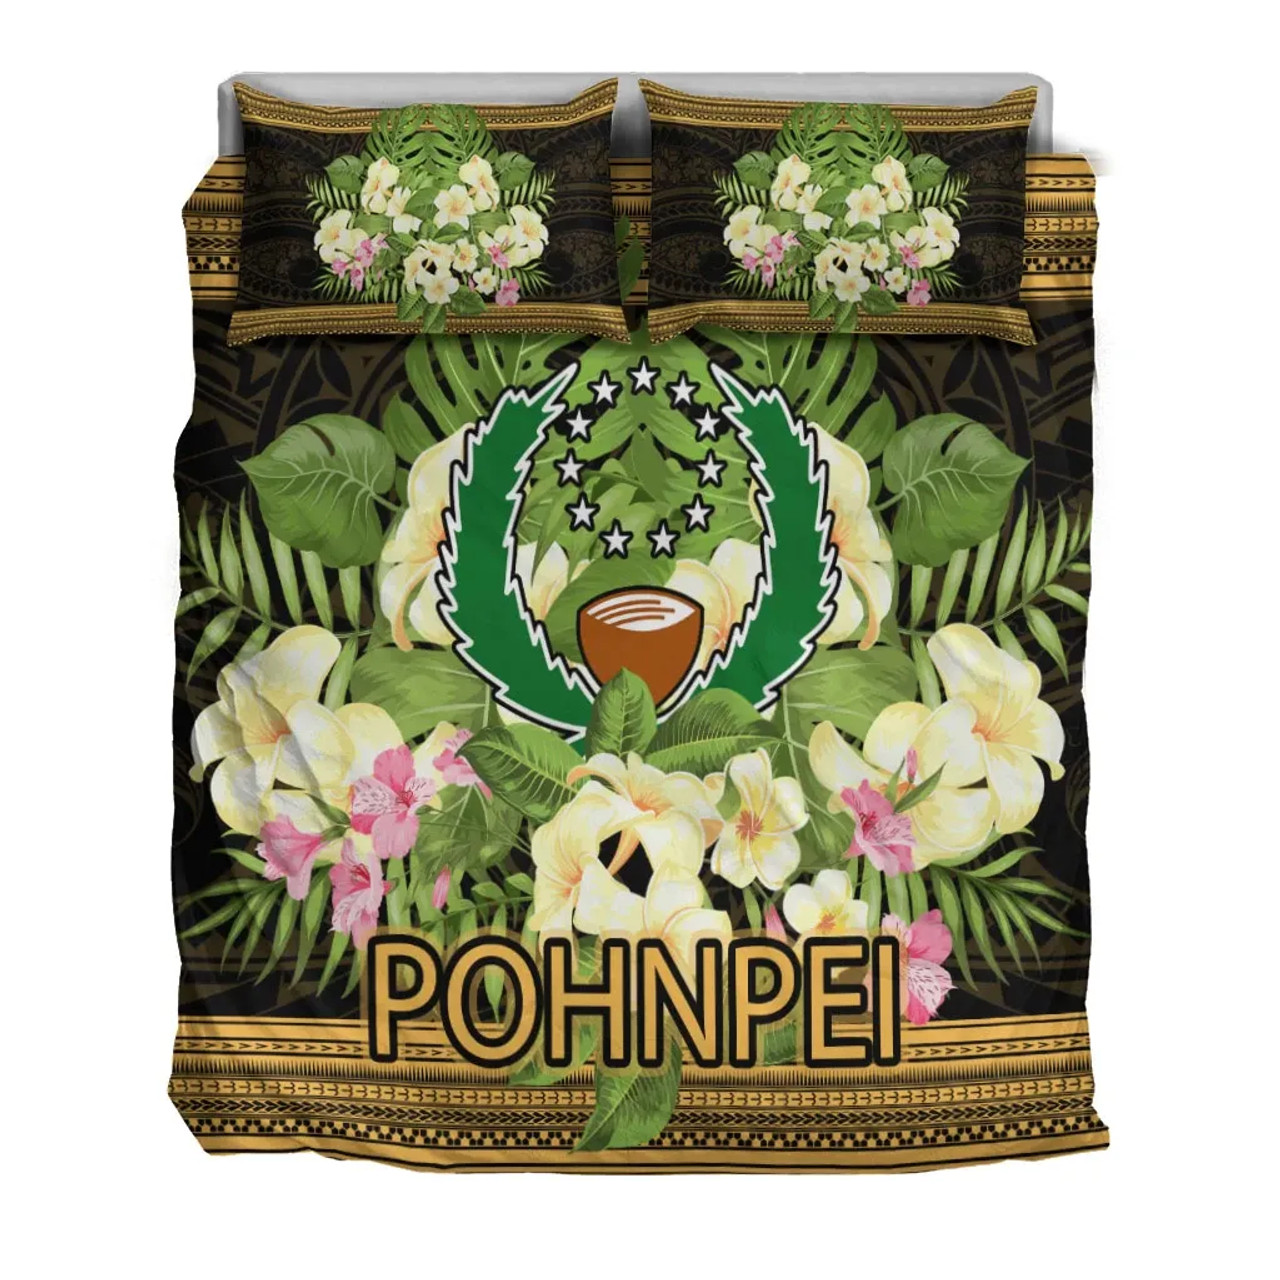 Pohnpei Bedding Set - Polynesian Gold Patterns Collection 3